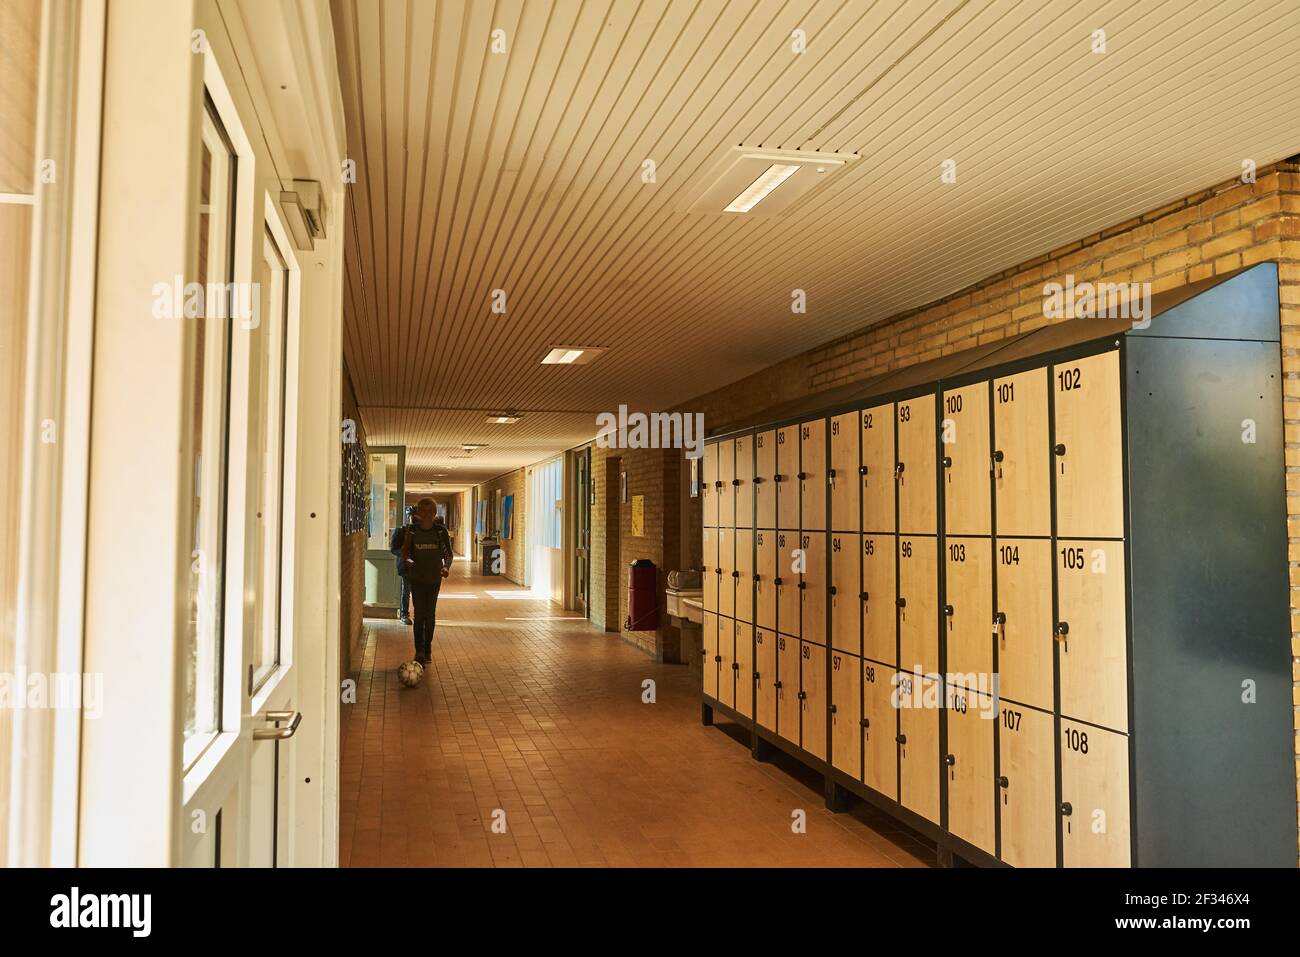 school lockers for students in a hallway Stock Photo